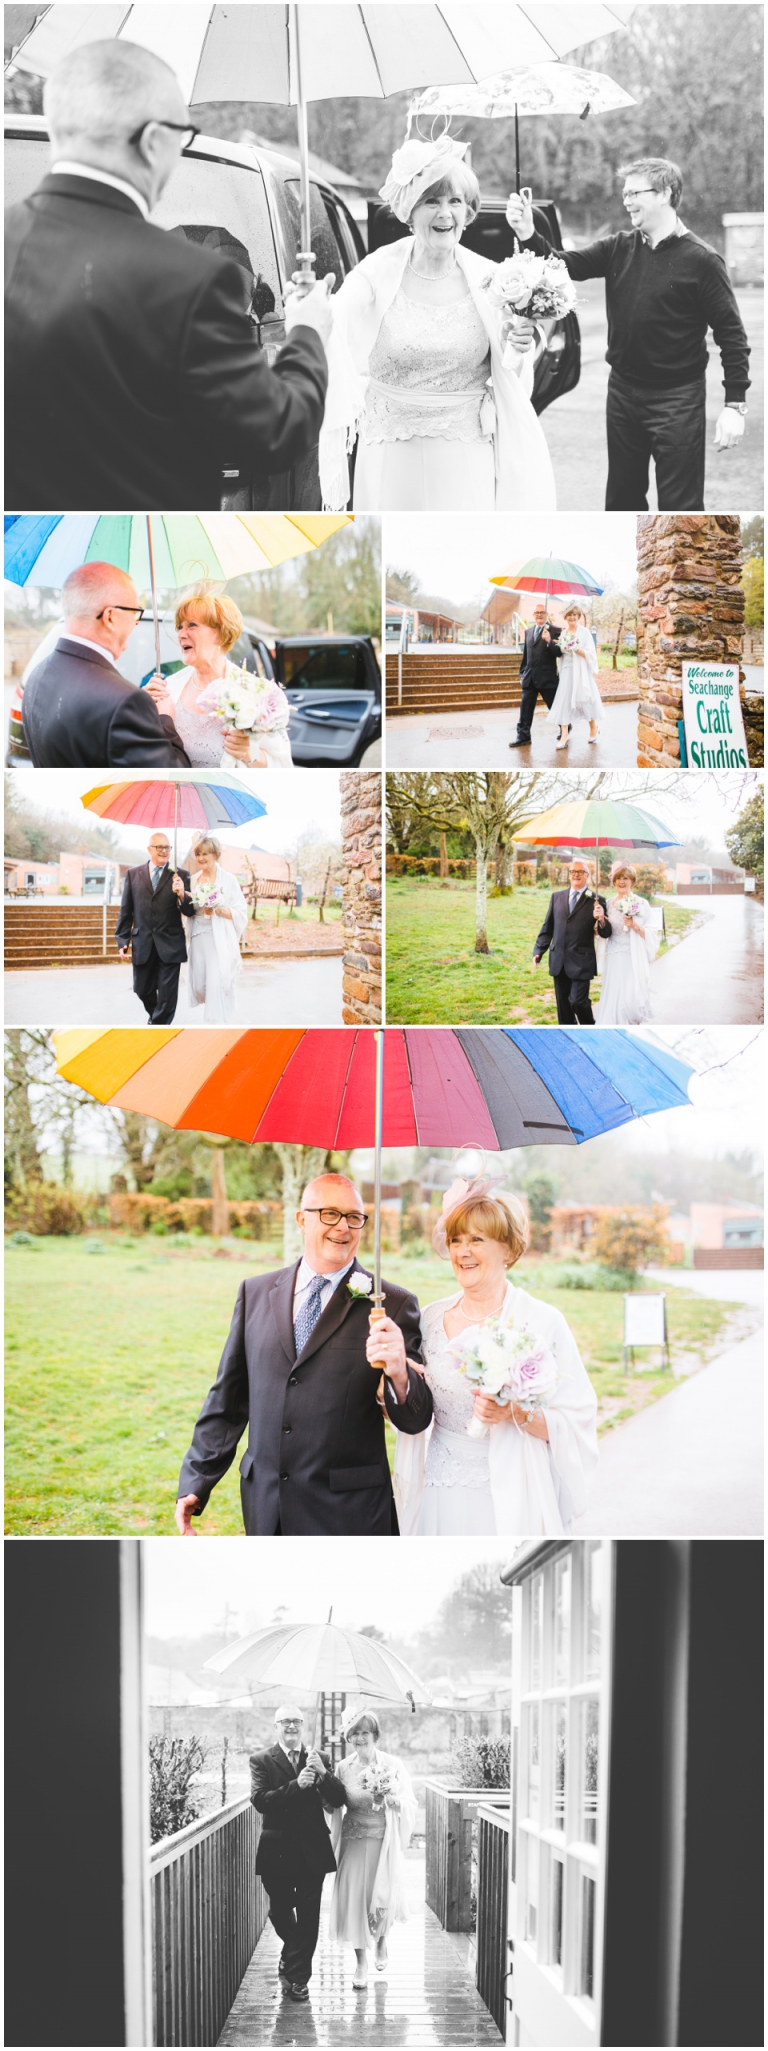 15 Small Intimate Cockington Court Wedding Photography in Torquay - bride arriving to wedding in rain and walking under umbrella